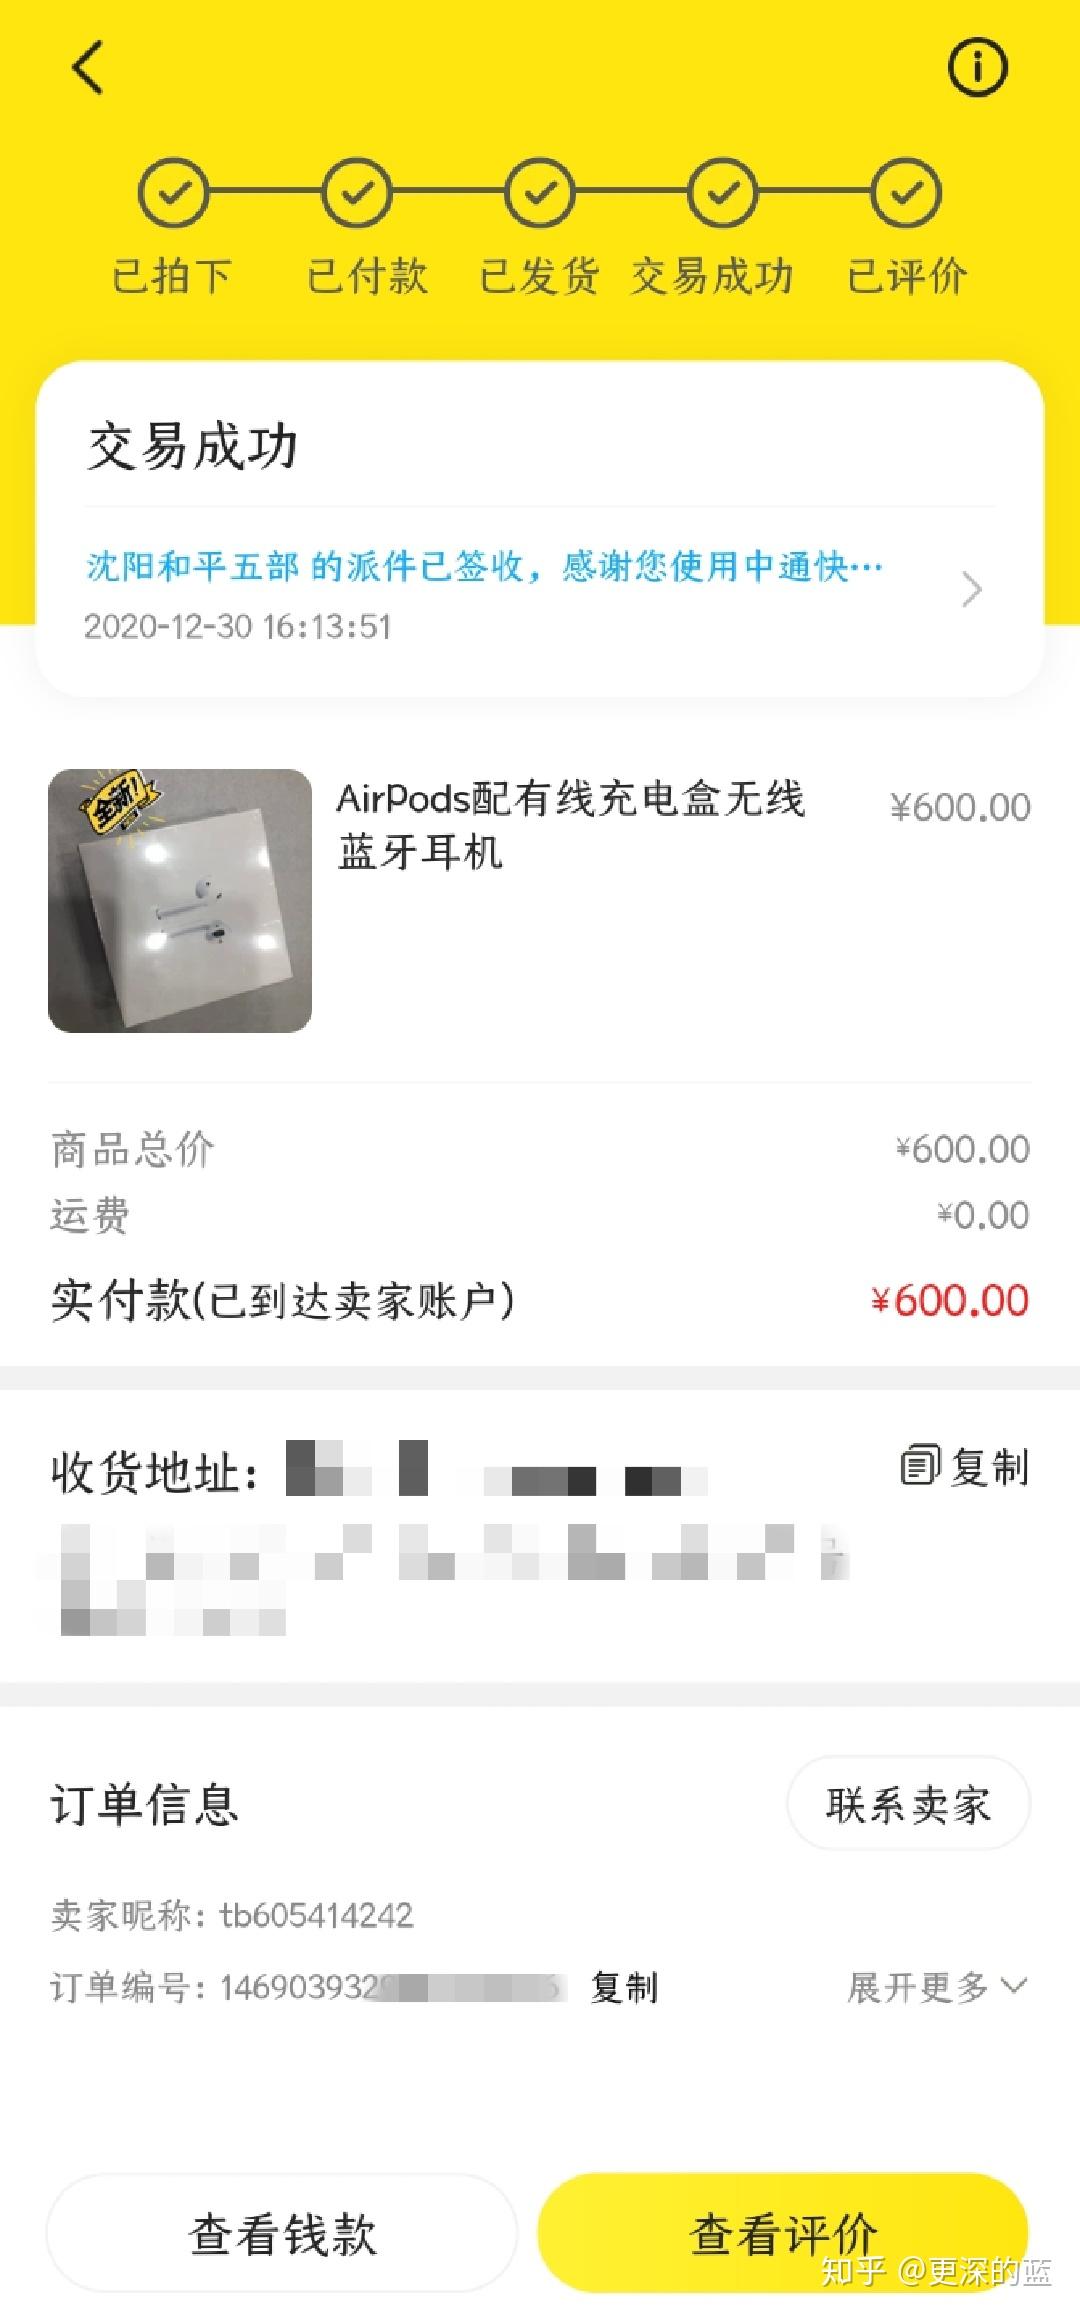 airpods订单截图图片